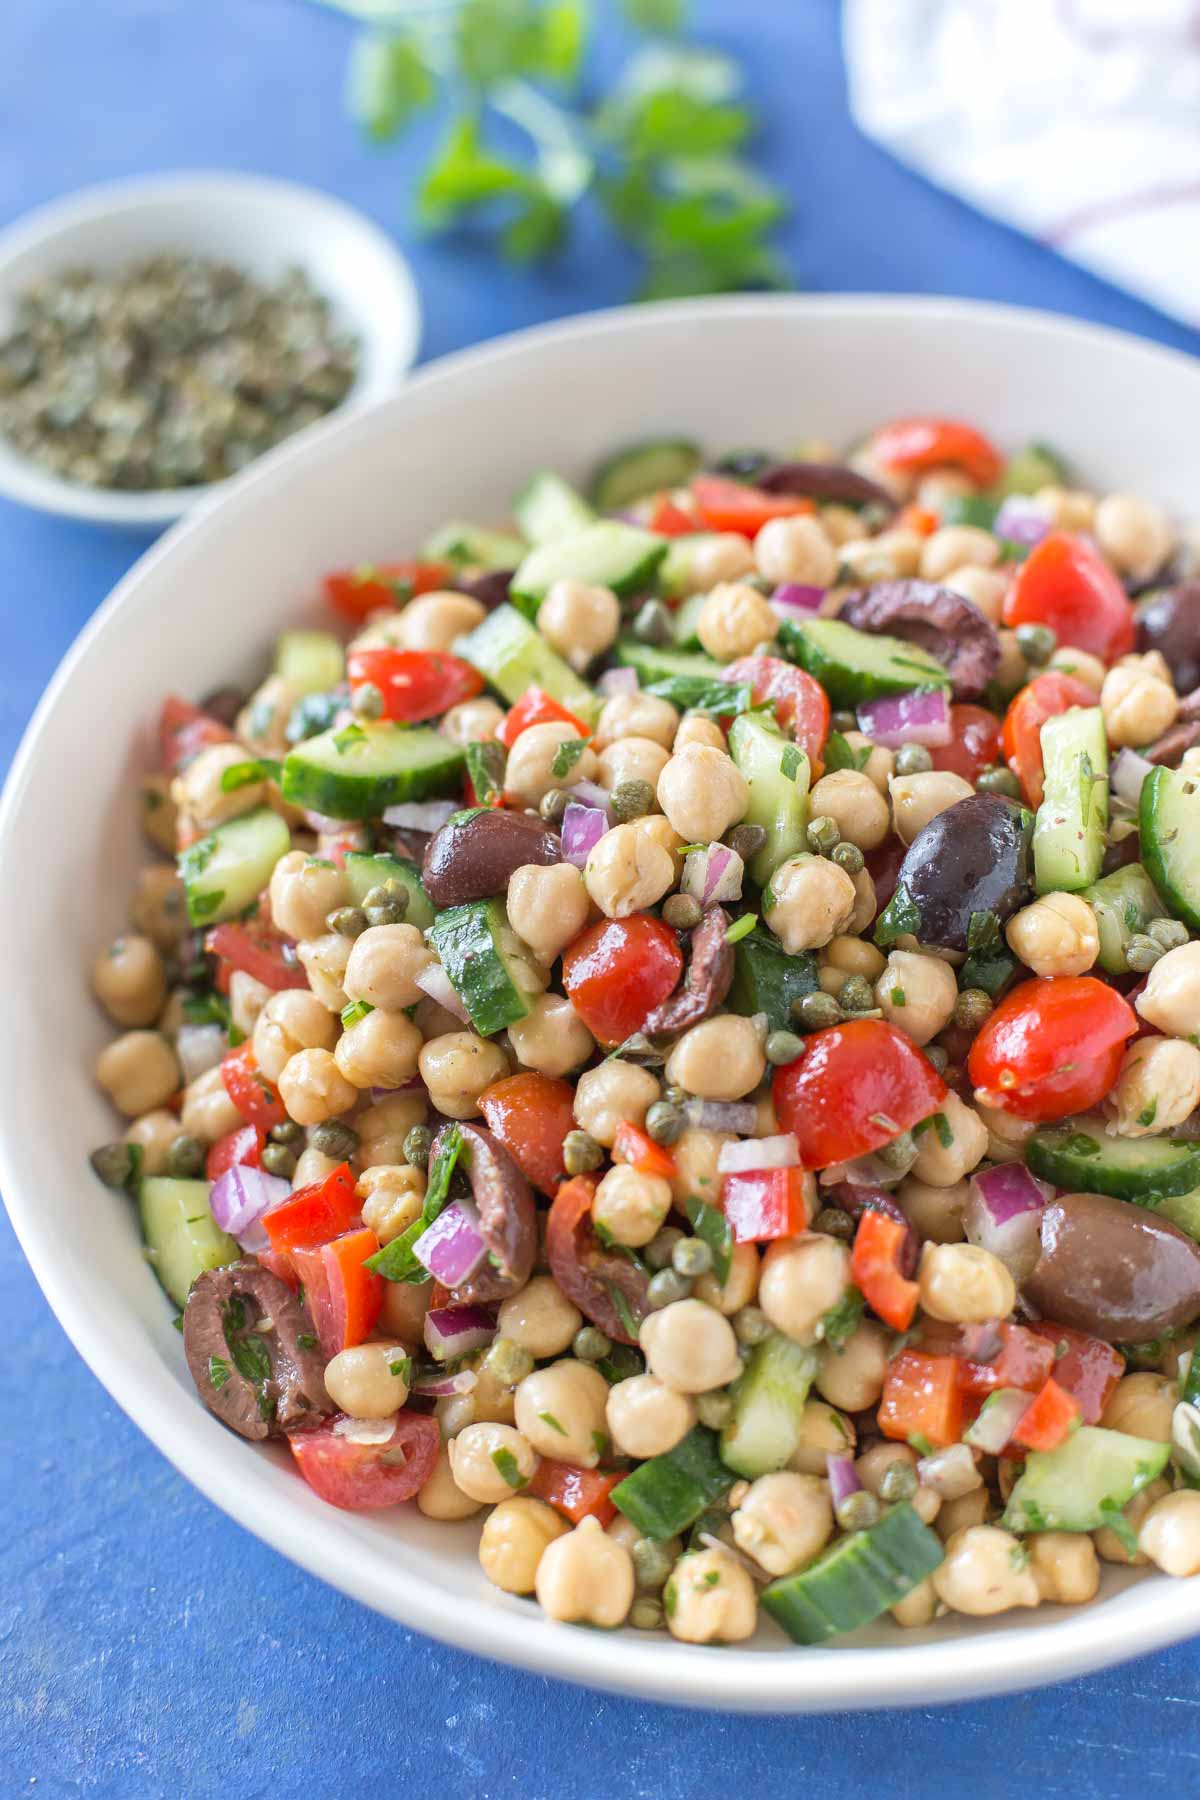 Mediterranean inspired chickpea salad with olives, cucumber, tomatoes, onion, in a white bowl on a blue background sitting next to a small bowl of capers, a parsley sprig and a white and red striped kitchen towel.